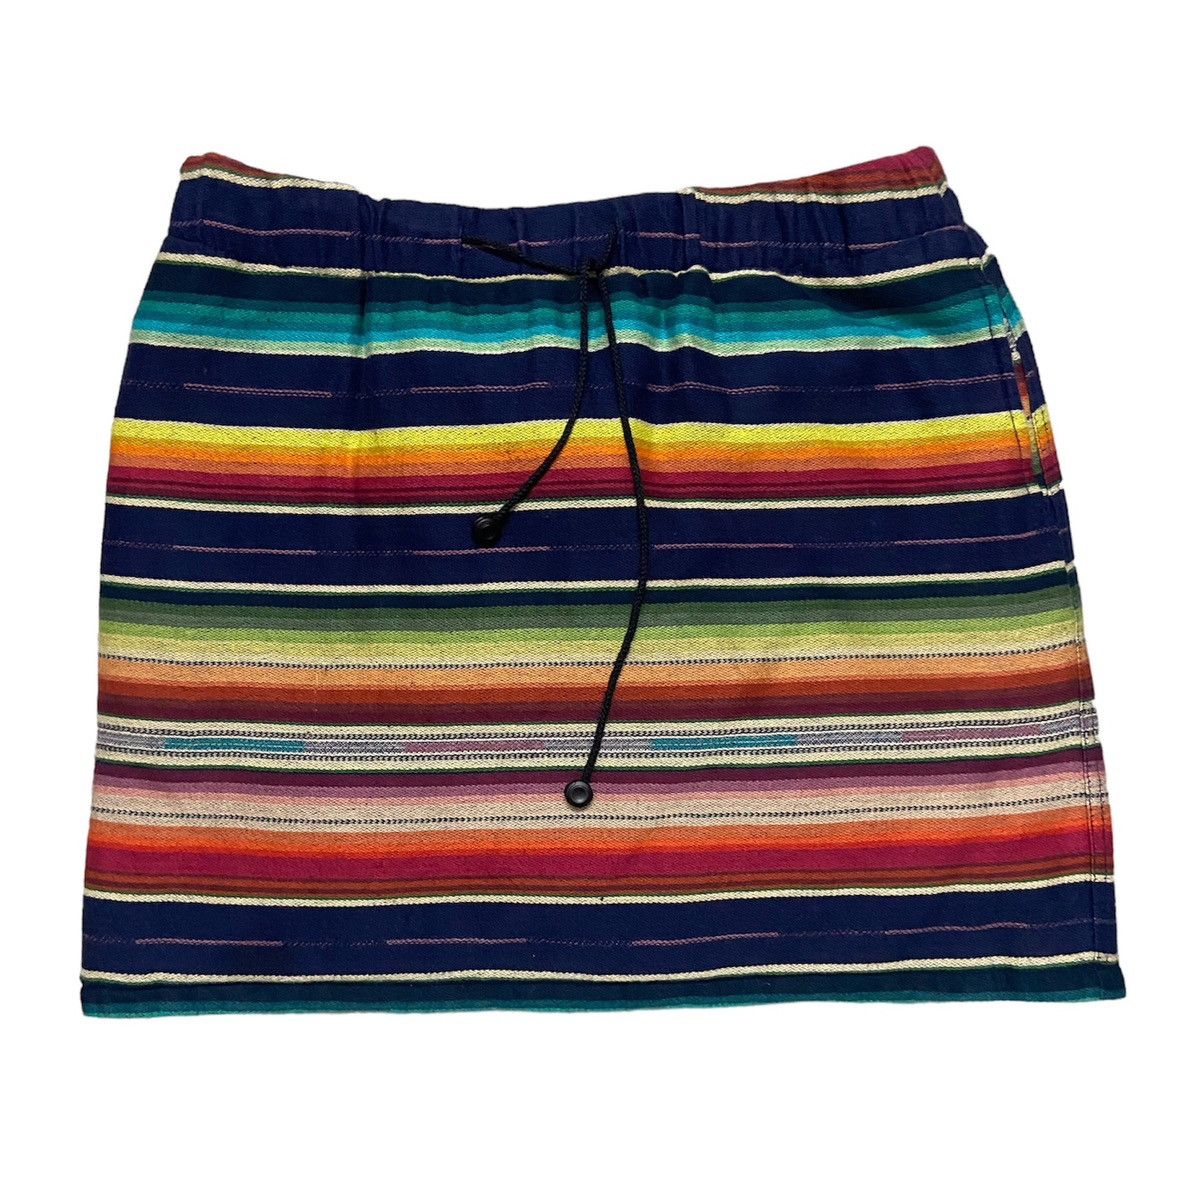 Outdoor Style Go Out! - Wildthings Inside Out Skirt - 1